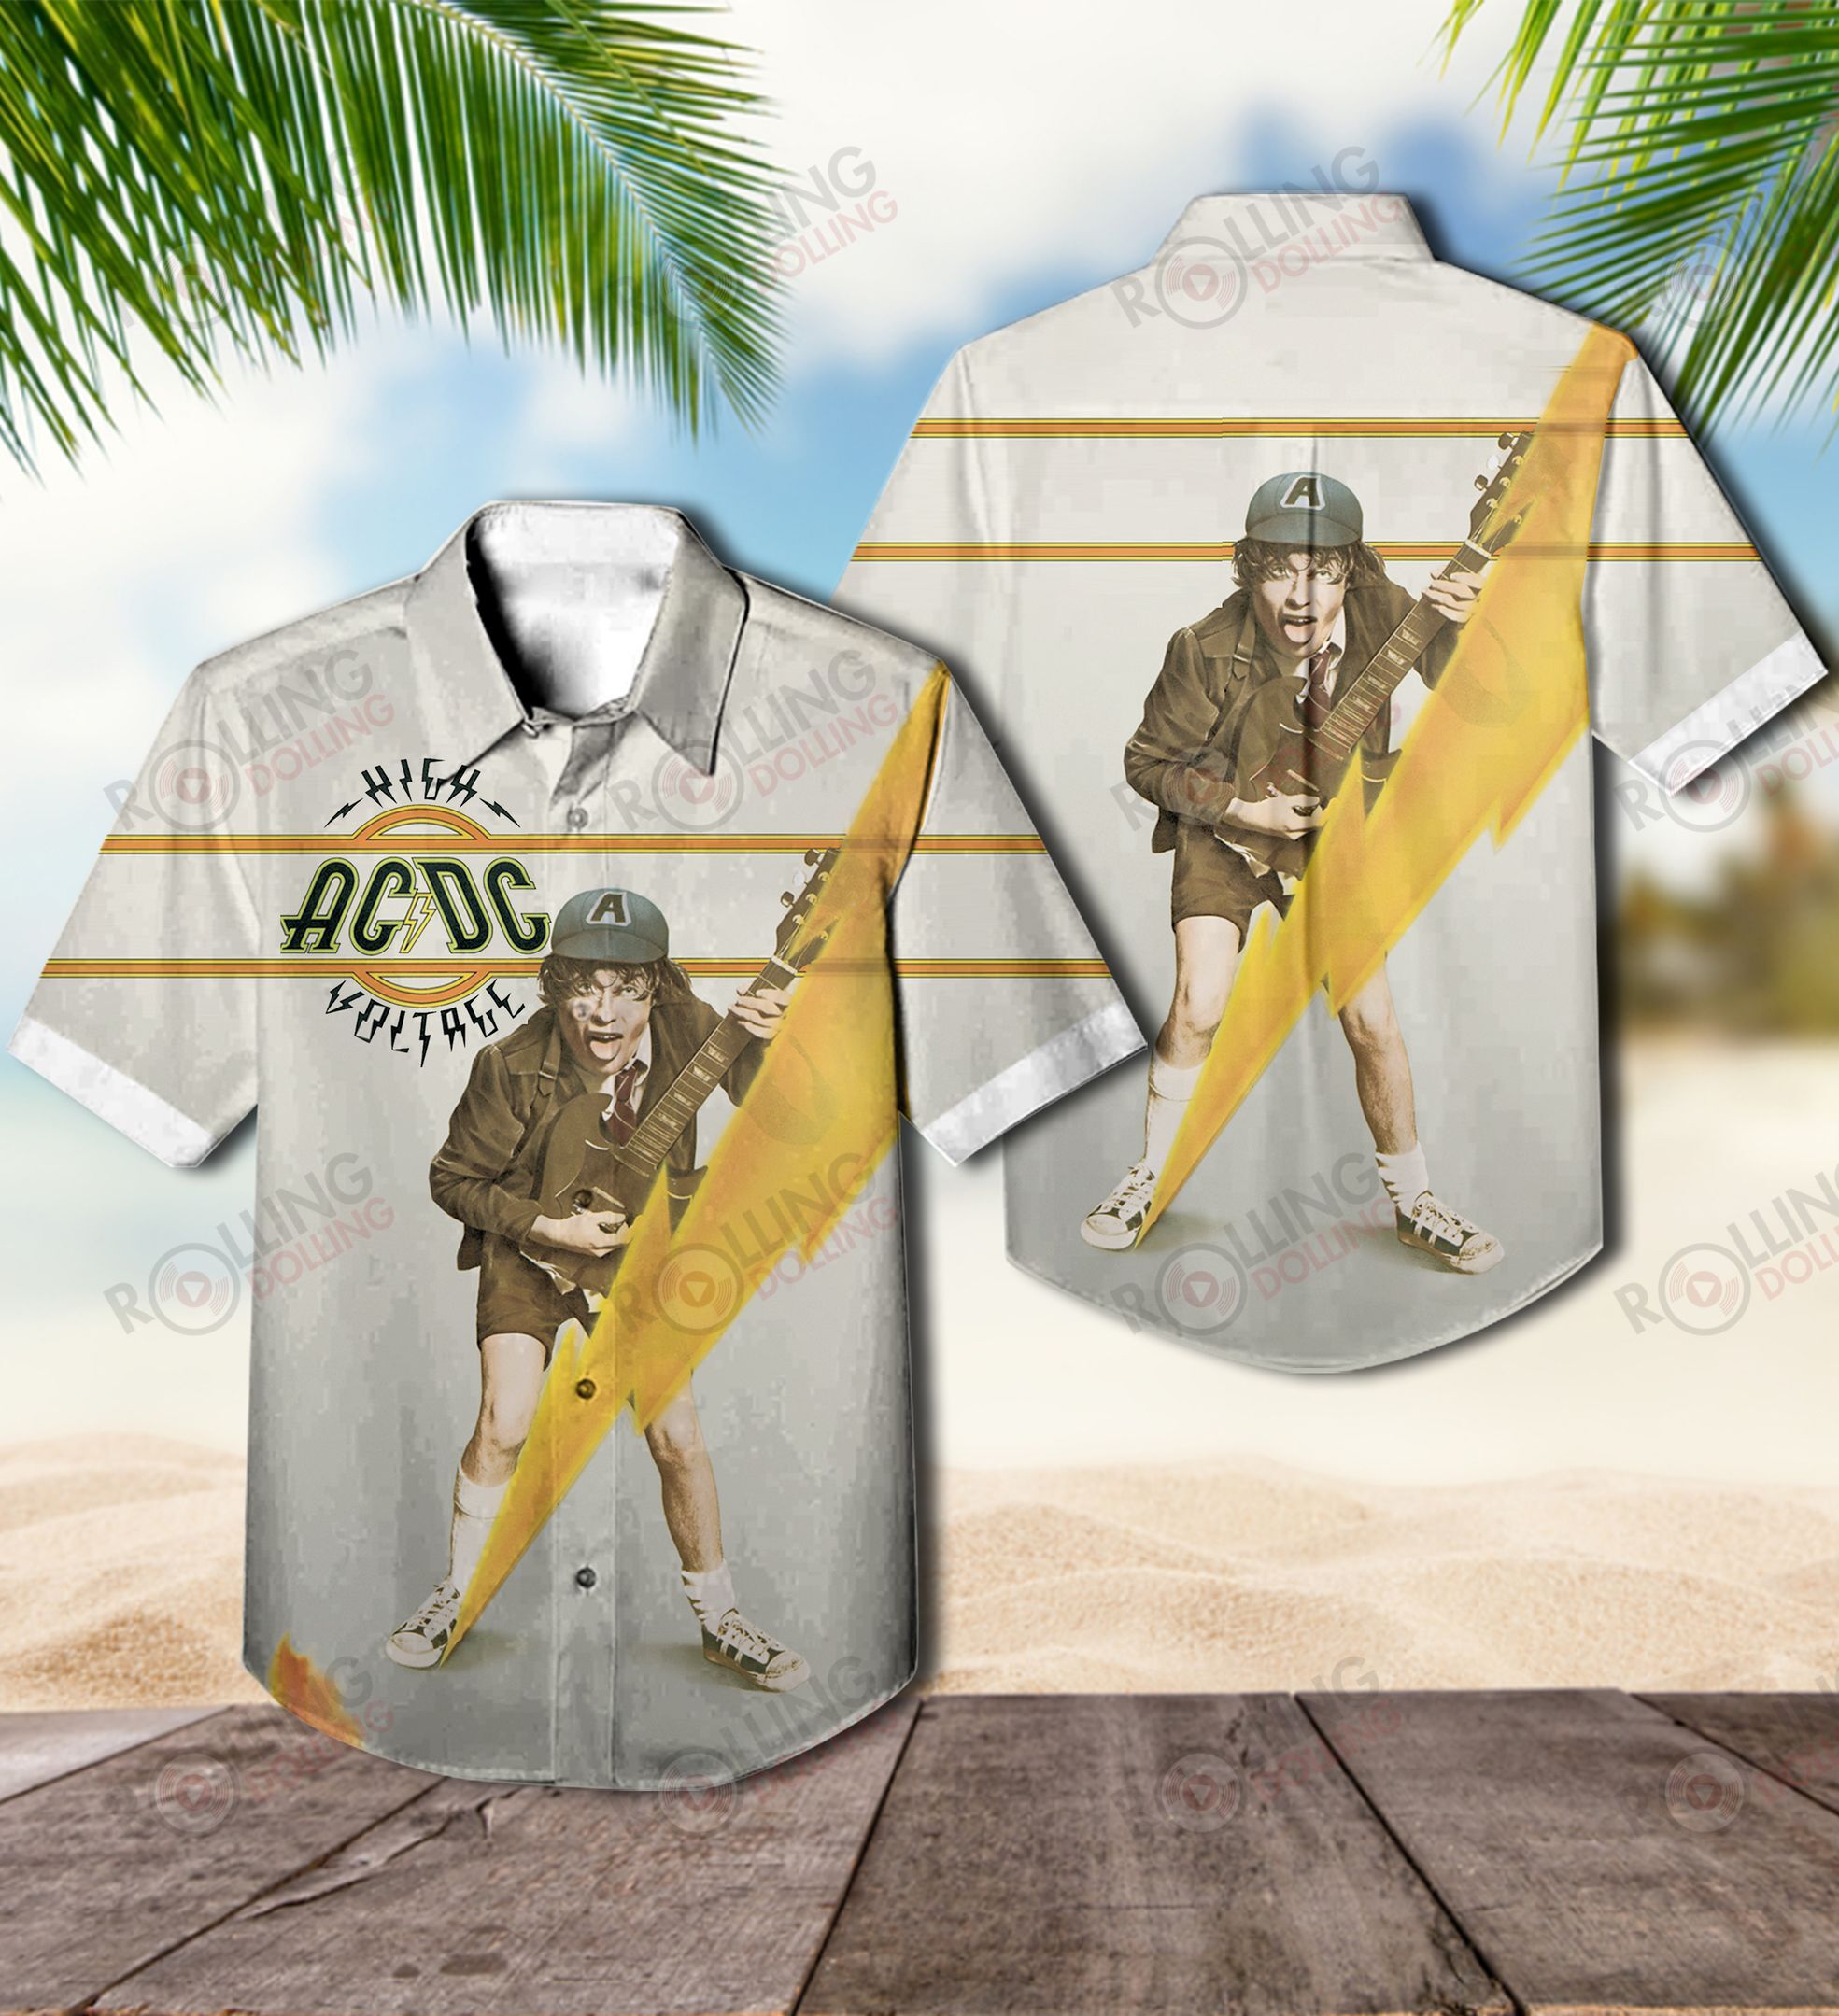 For summer, consider wearing This Amazing Hawaiian Shirt shirt in our store 133